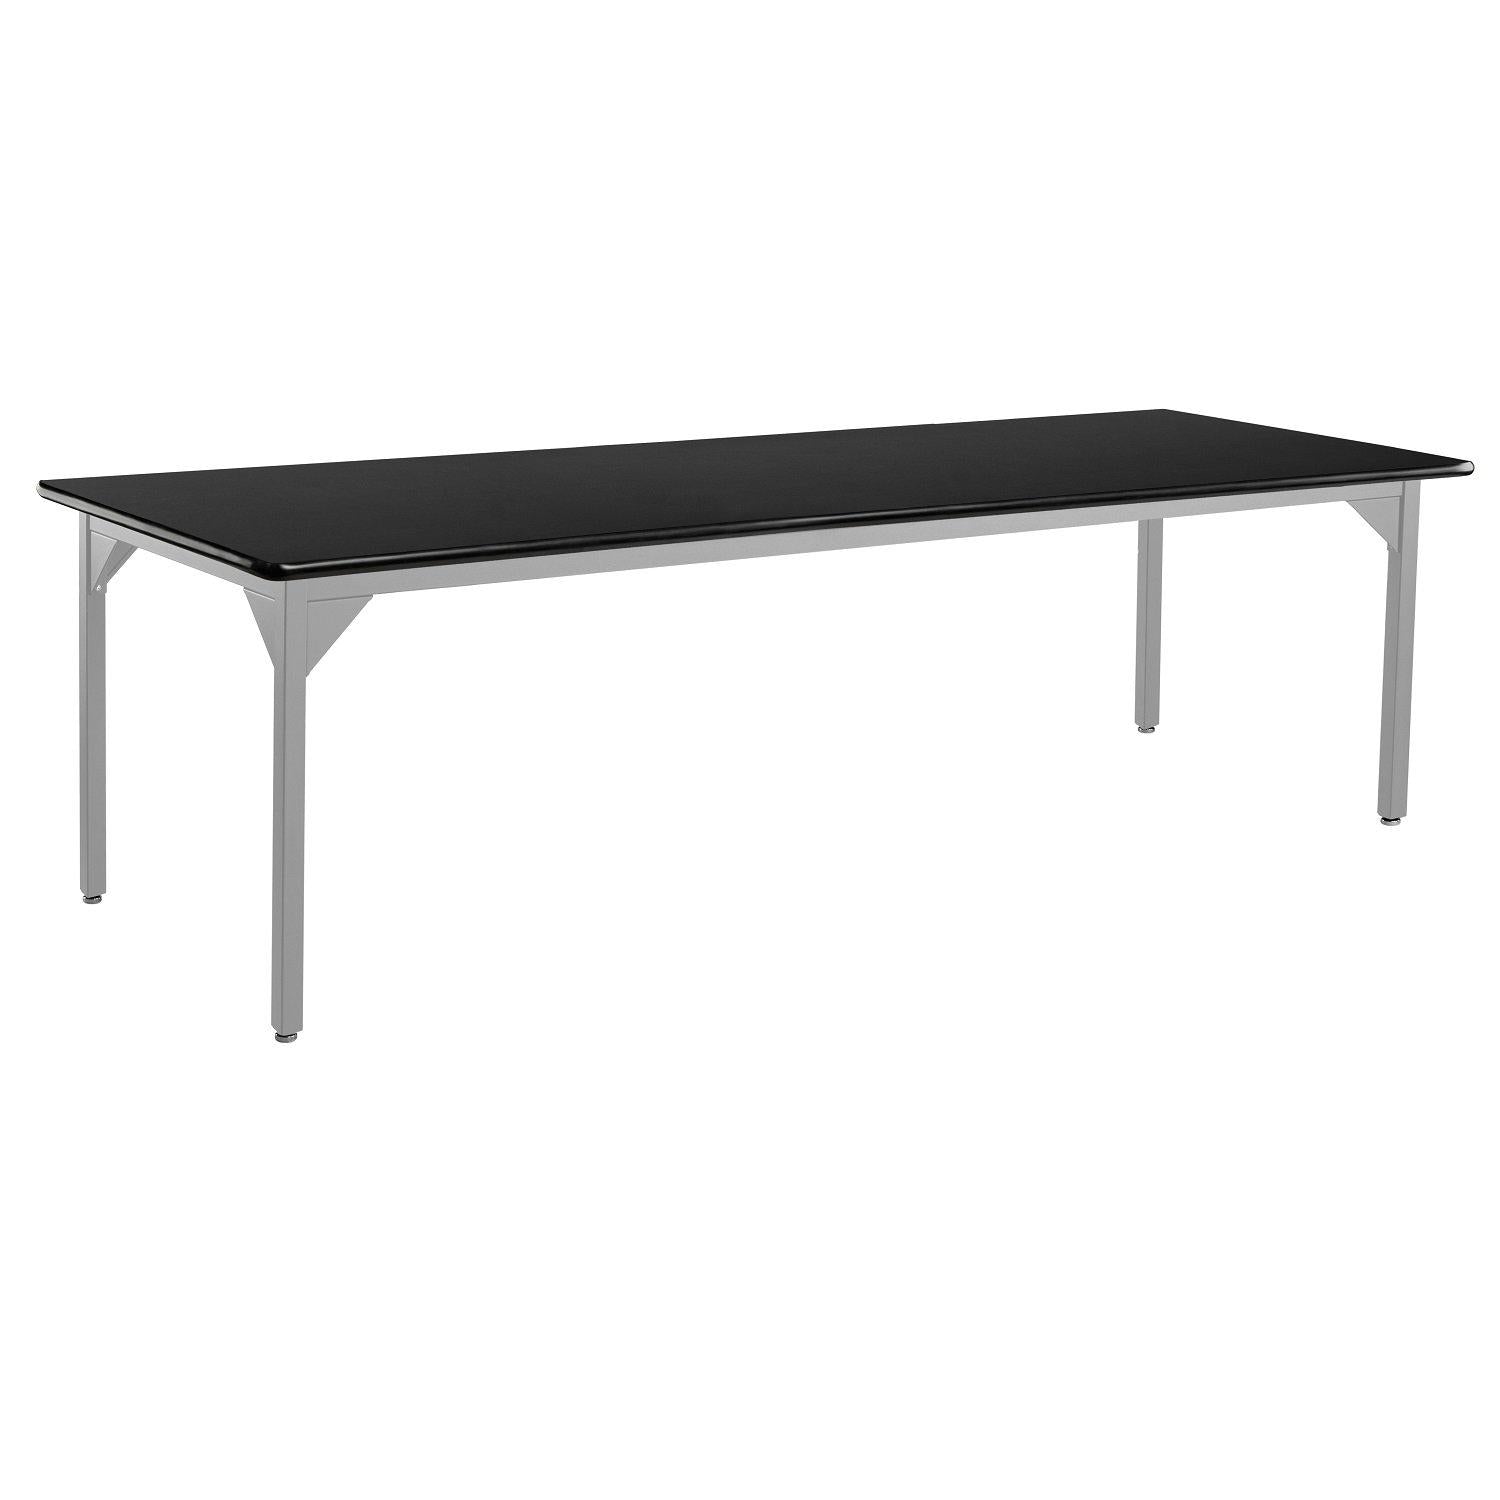 Heavy-Duty Fixed Height Utility Table, Soft Grey Frame, 36" x 96", High-Pressure Laminate Top with T-Mold Edge